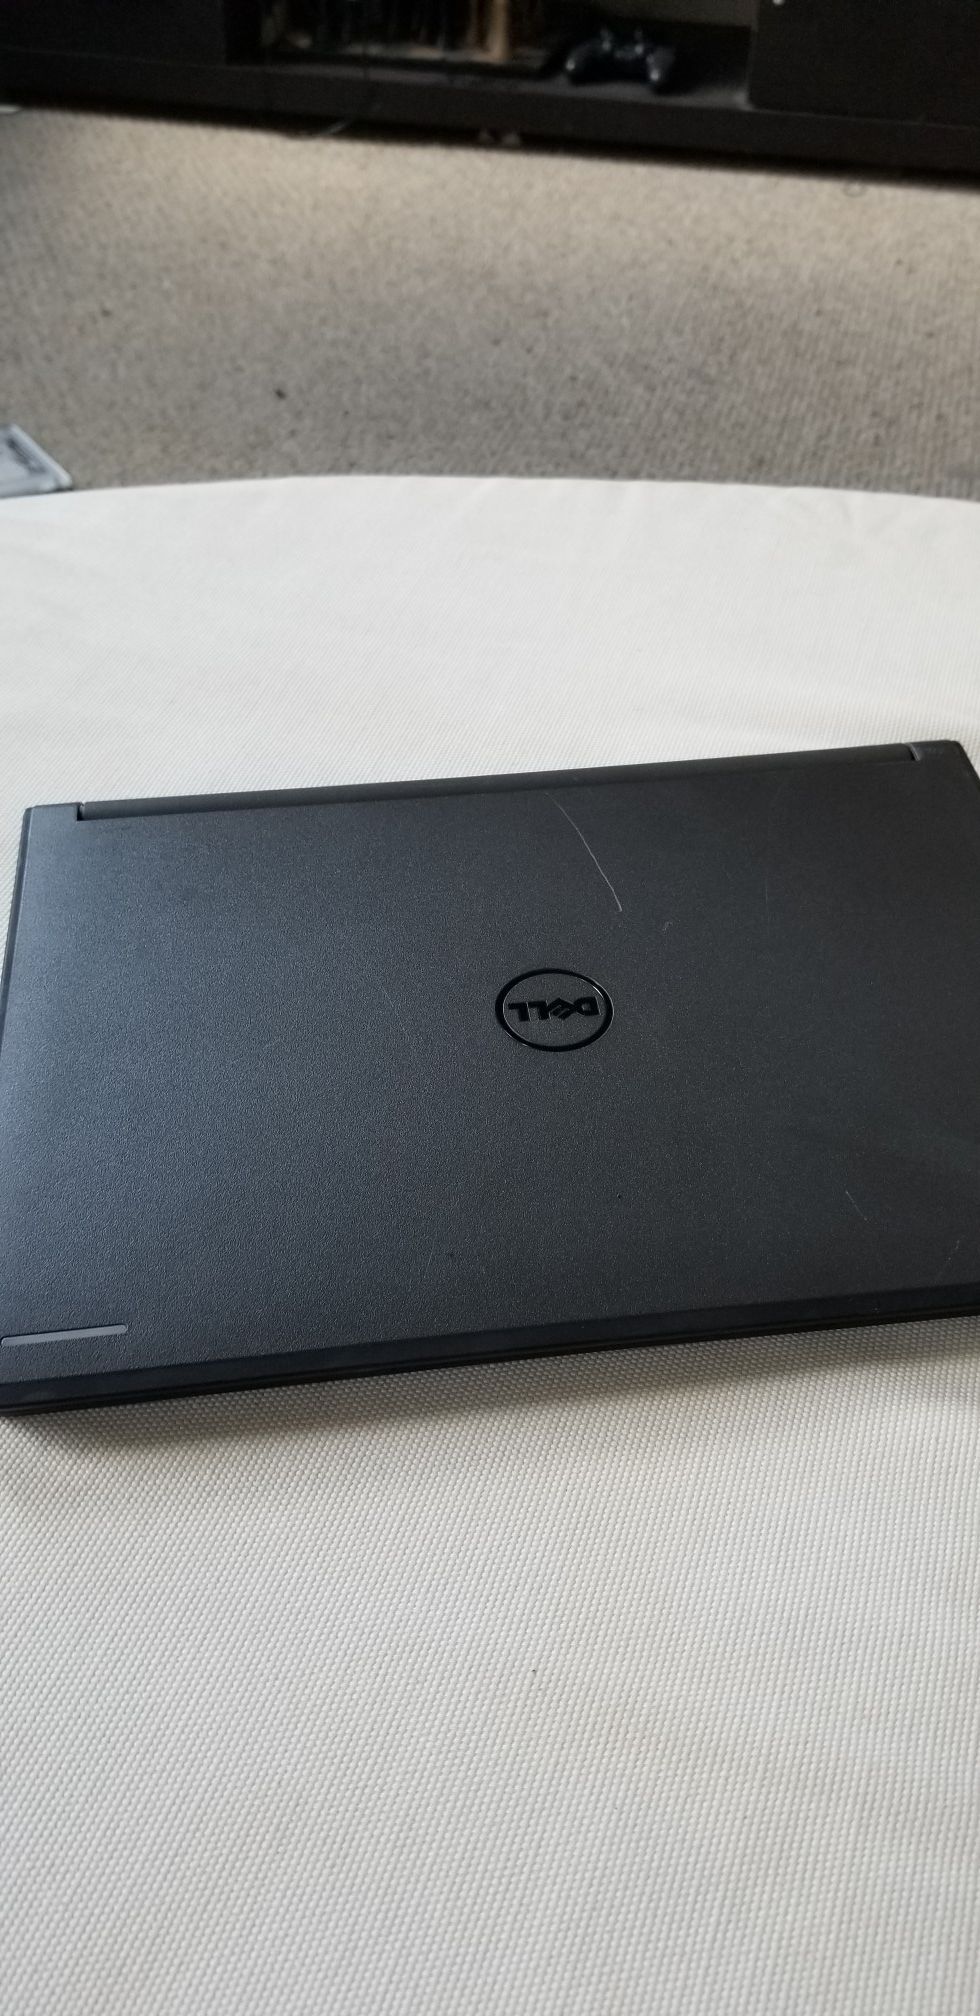 Dell chromebook 11 laptop with 30 day warranty DELIVERY AVAILABLE